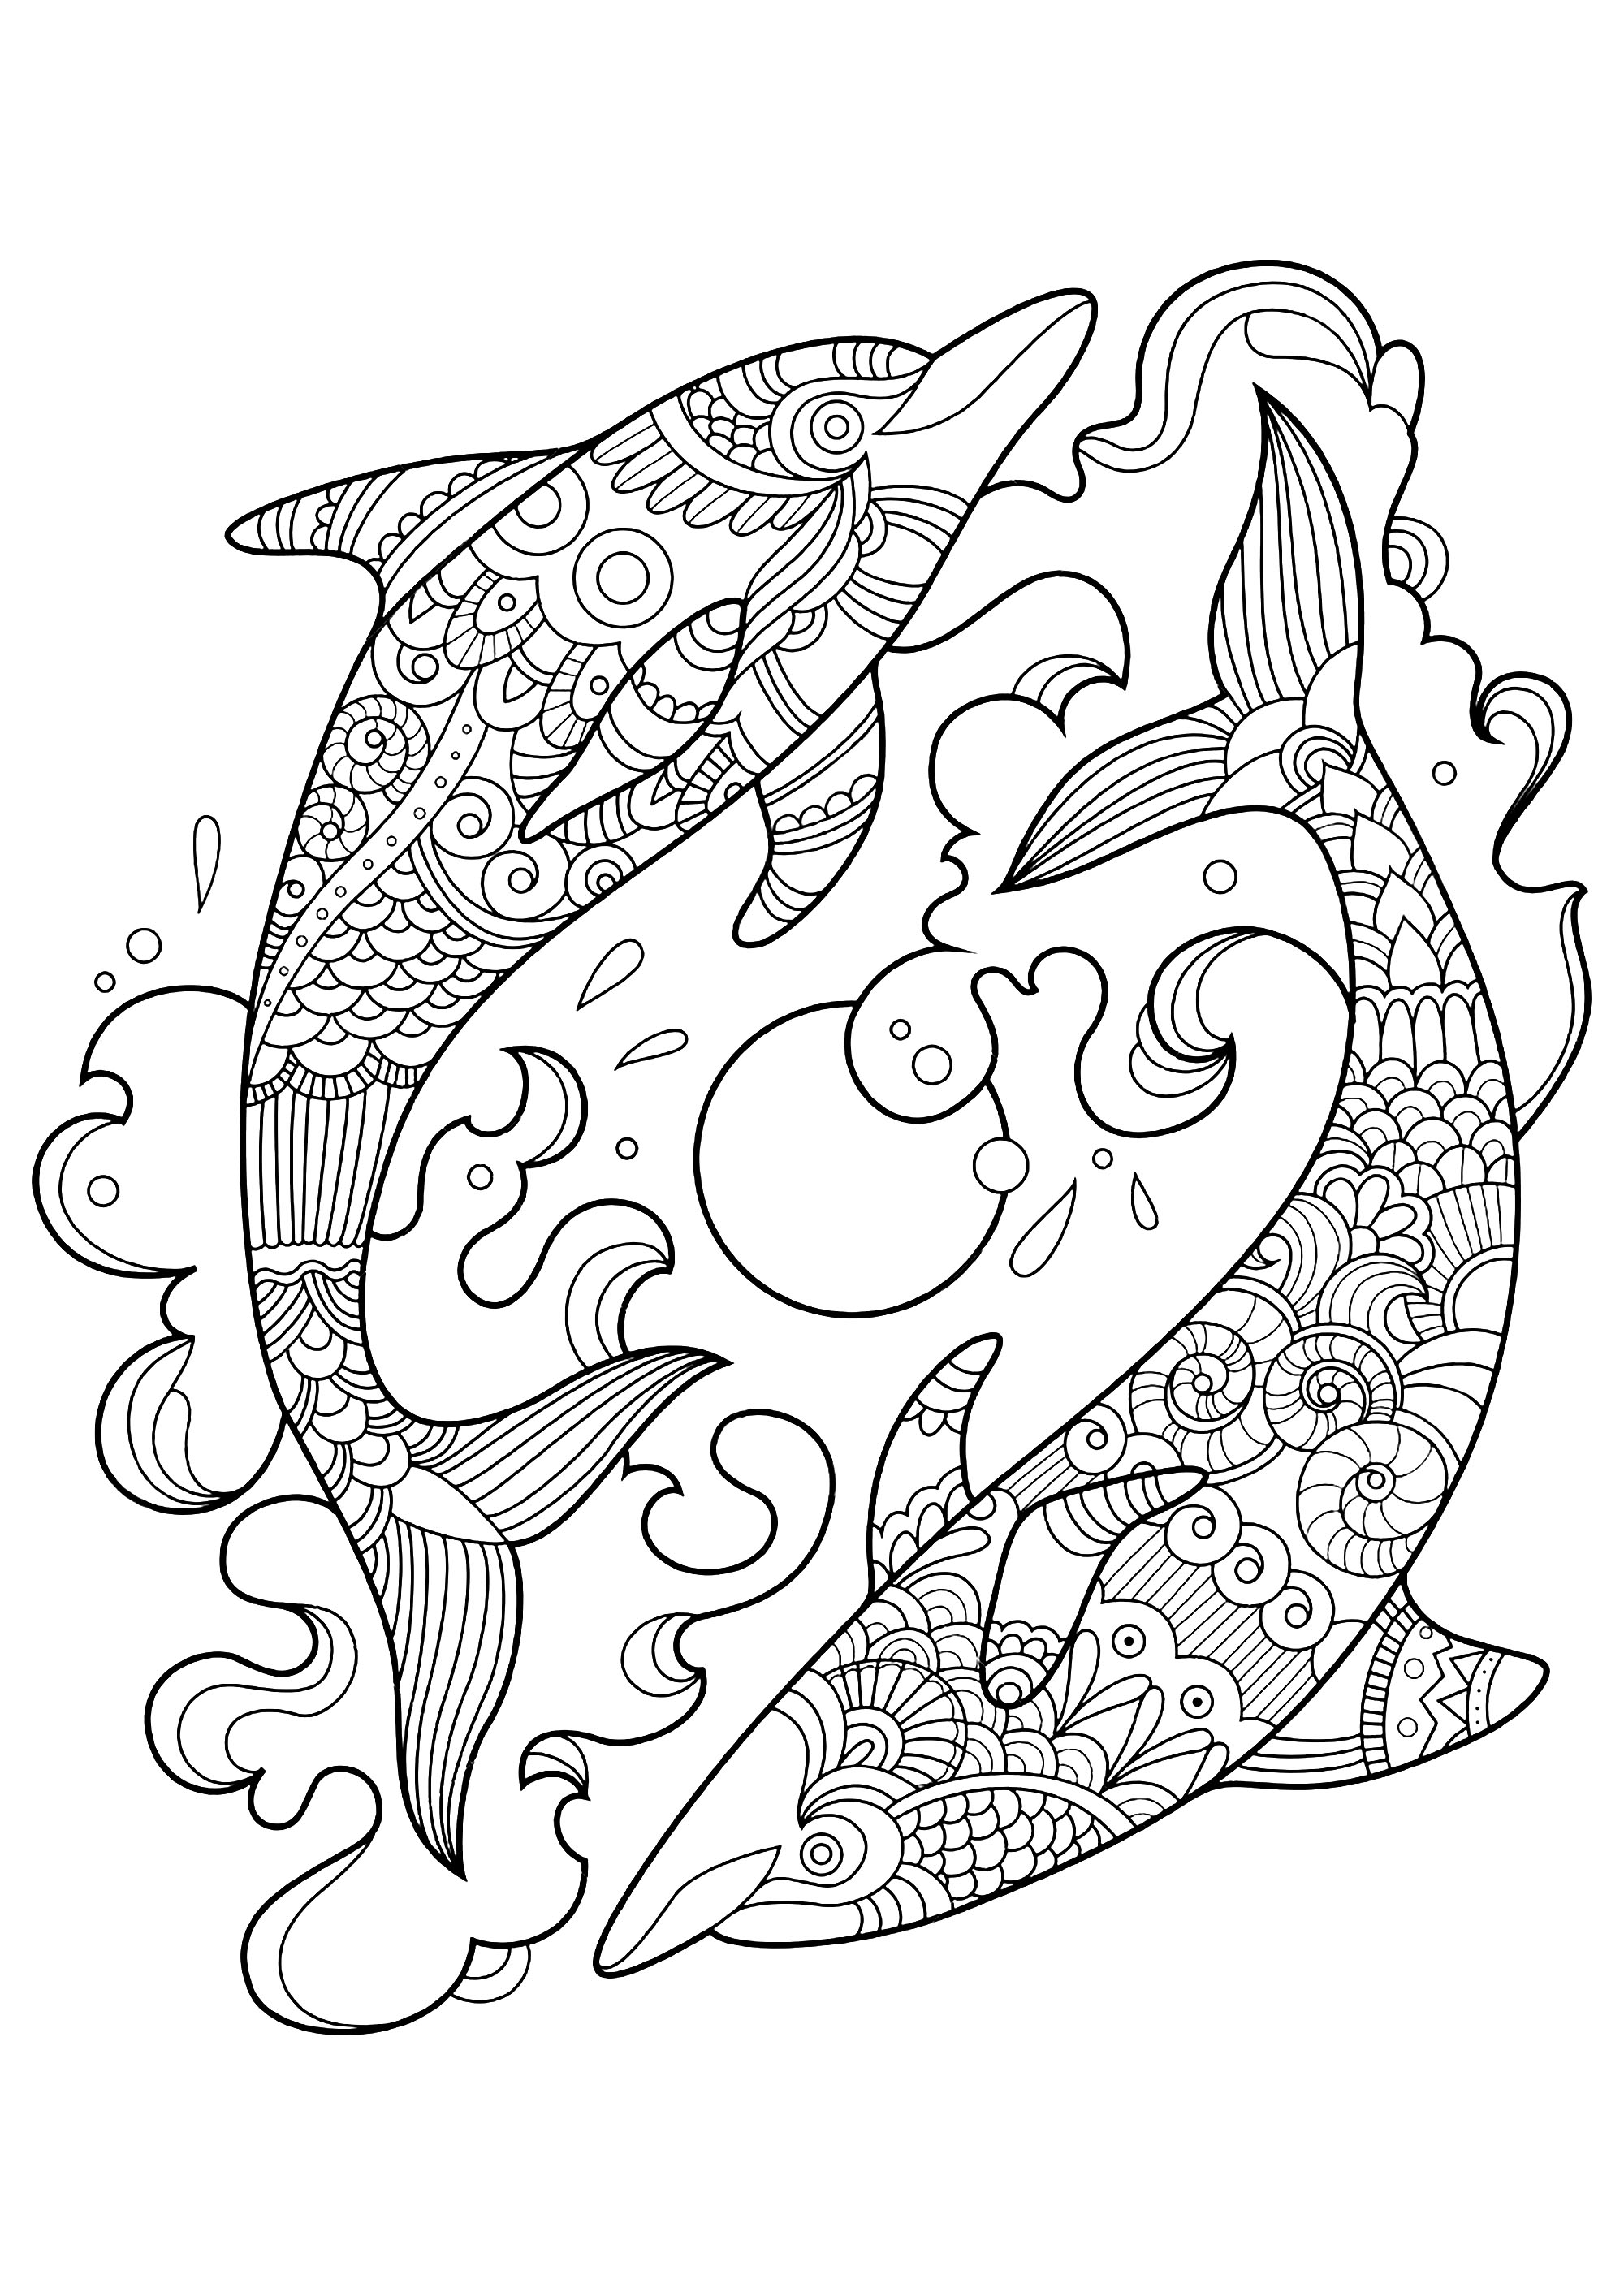 dolphin color sheet free printable dolphin coloring pages for kids sheet dolphin color 